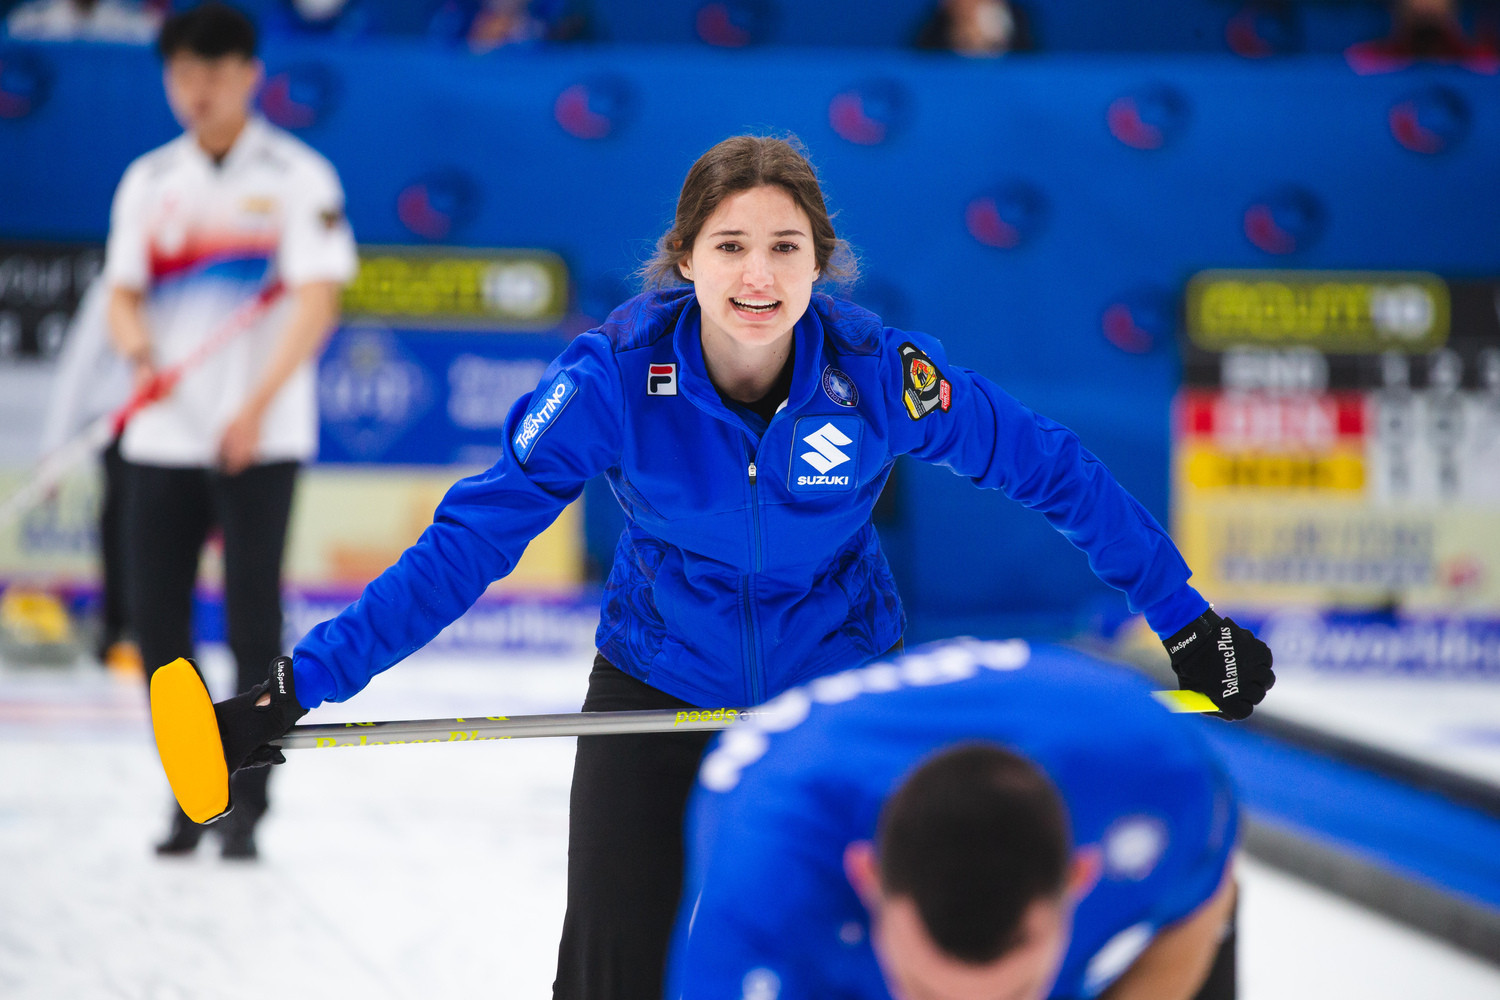 Italy win opening five matches at World Mixed Doubles Curling Championship